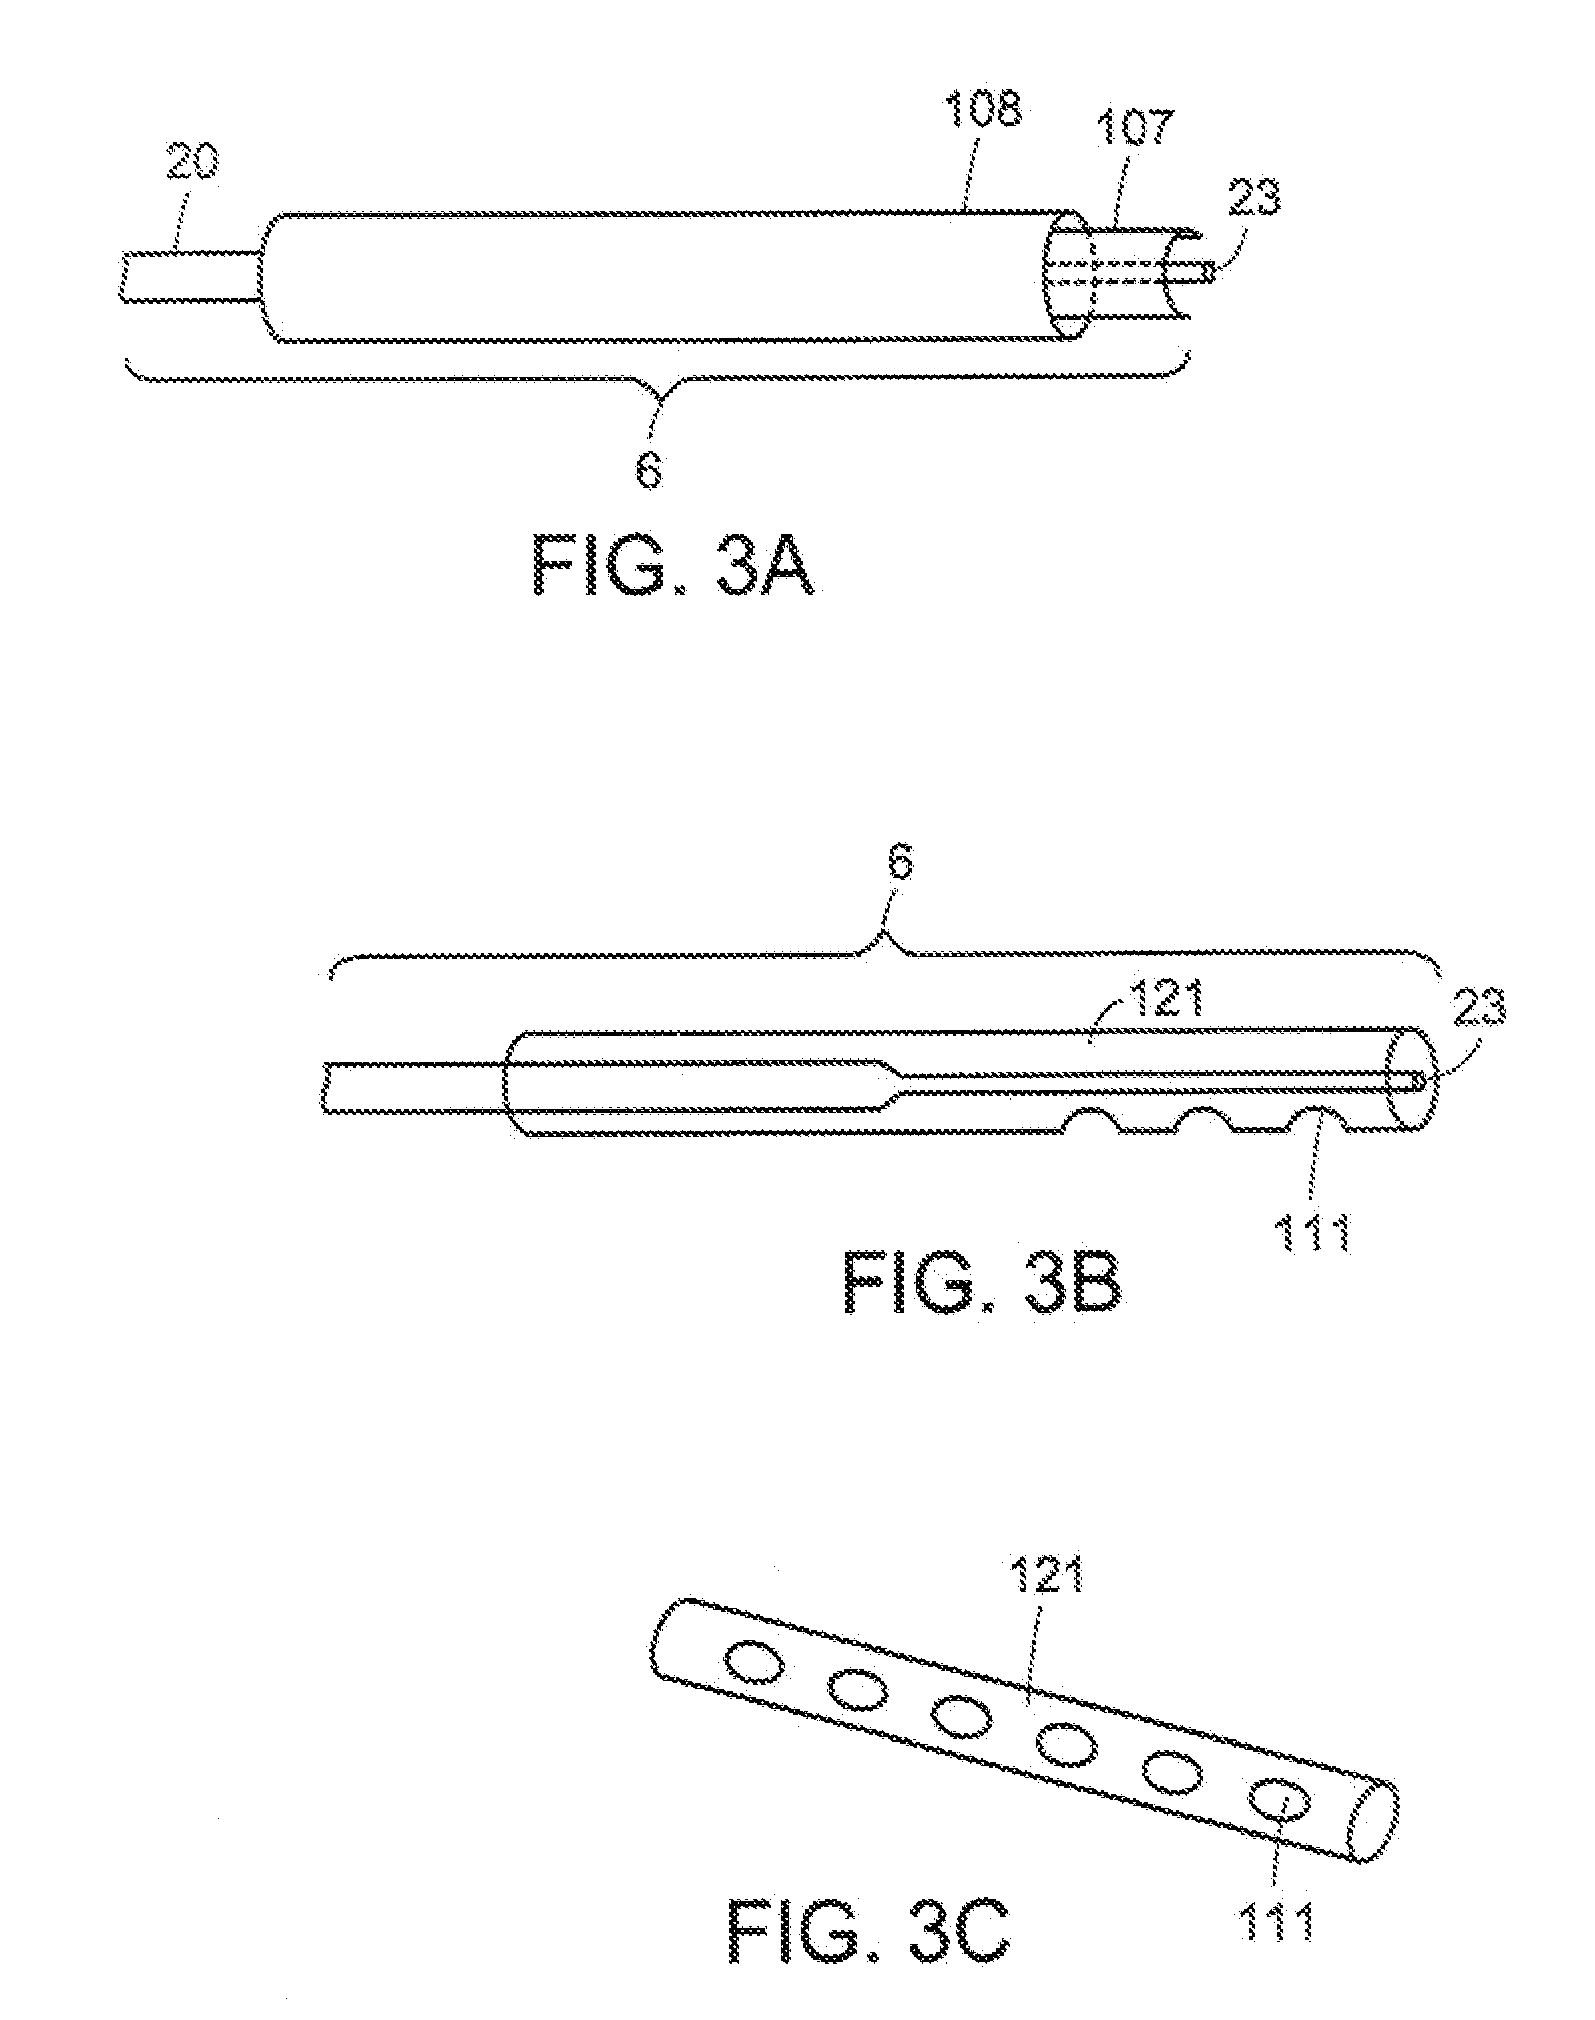 Apparatus and method of removing occlusions using ultrasonic medical device operating in a transverse mode